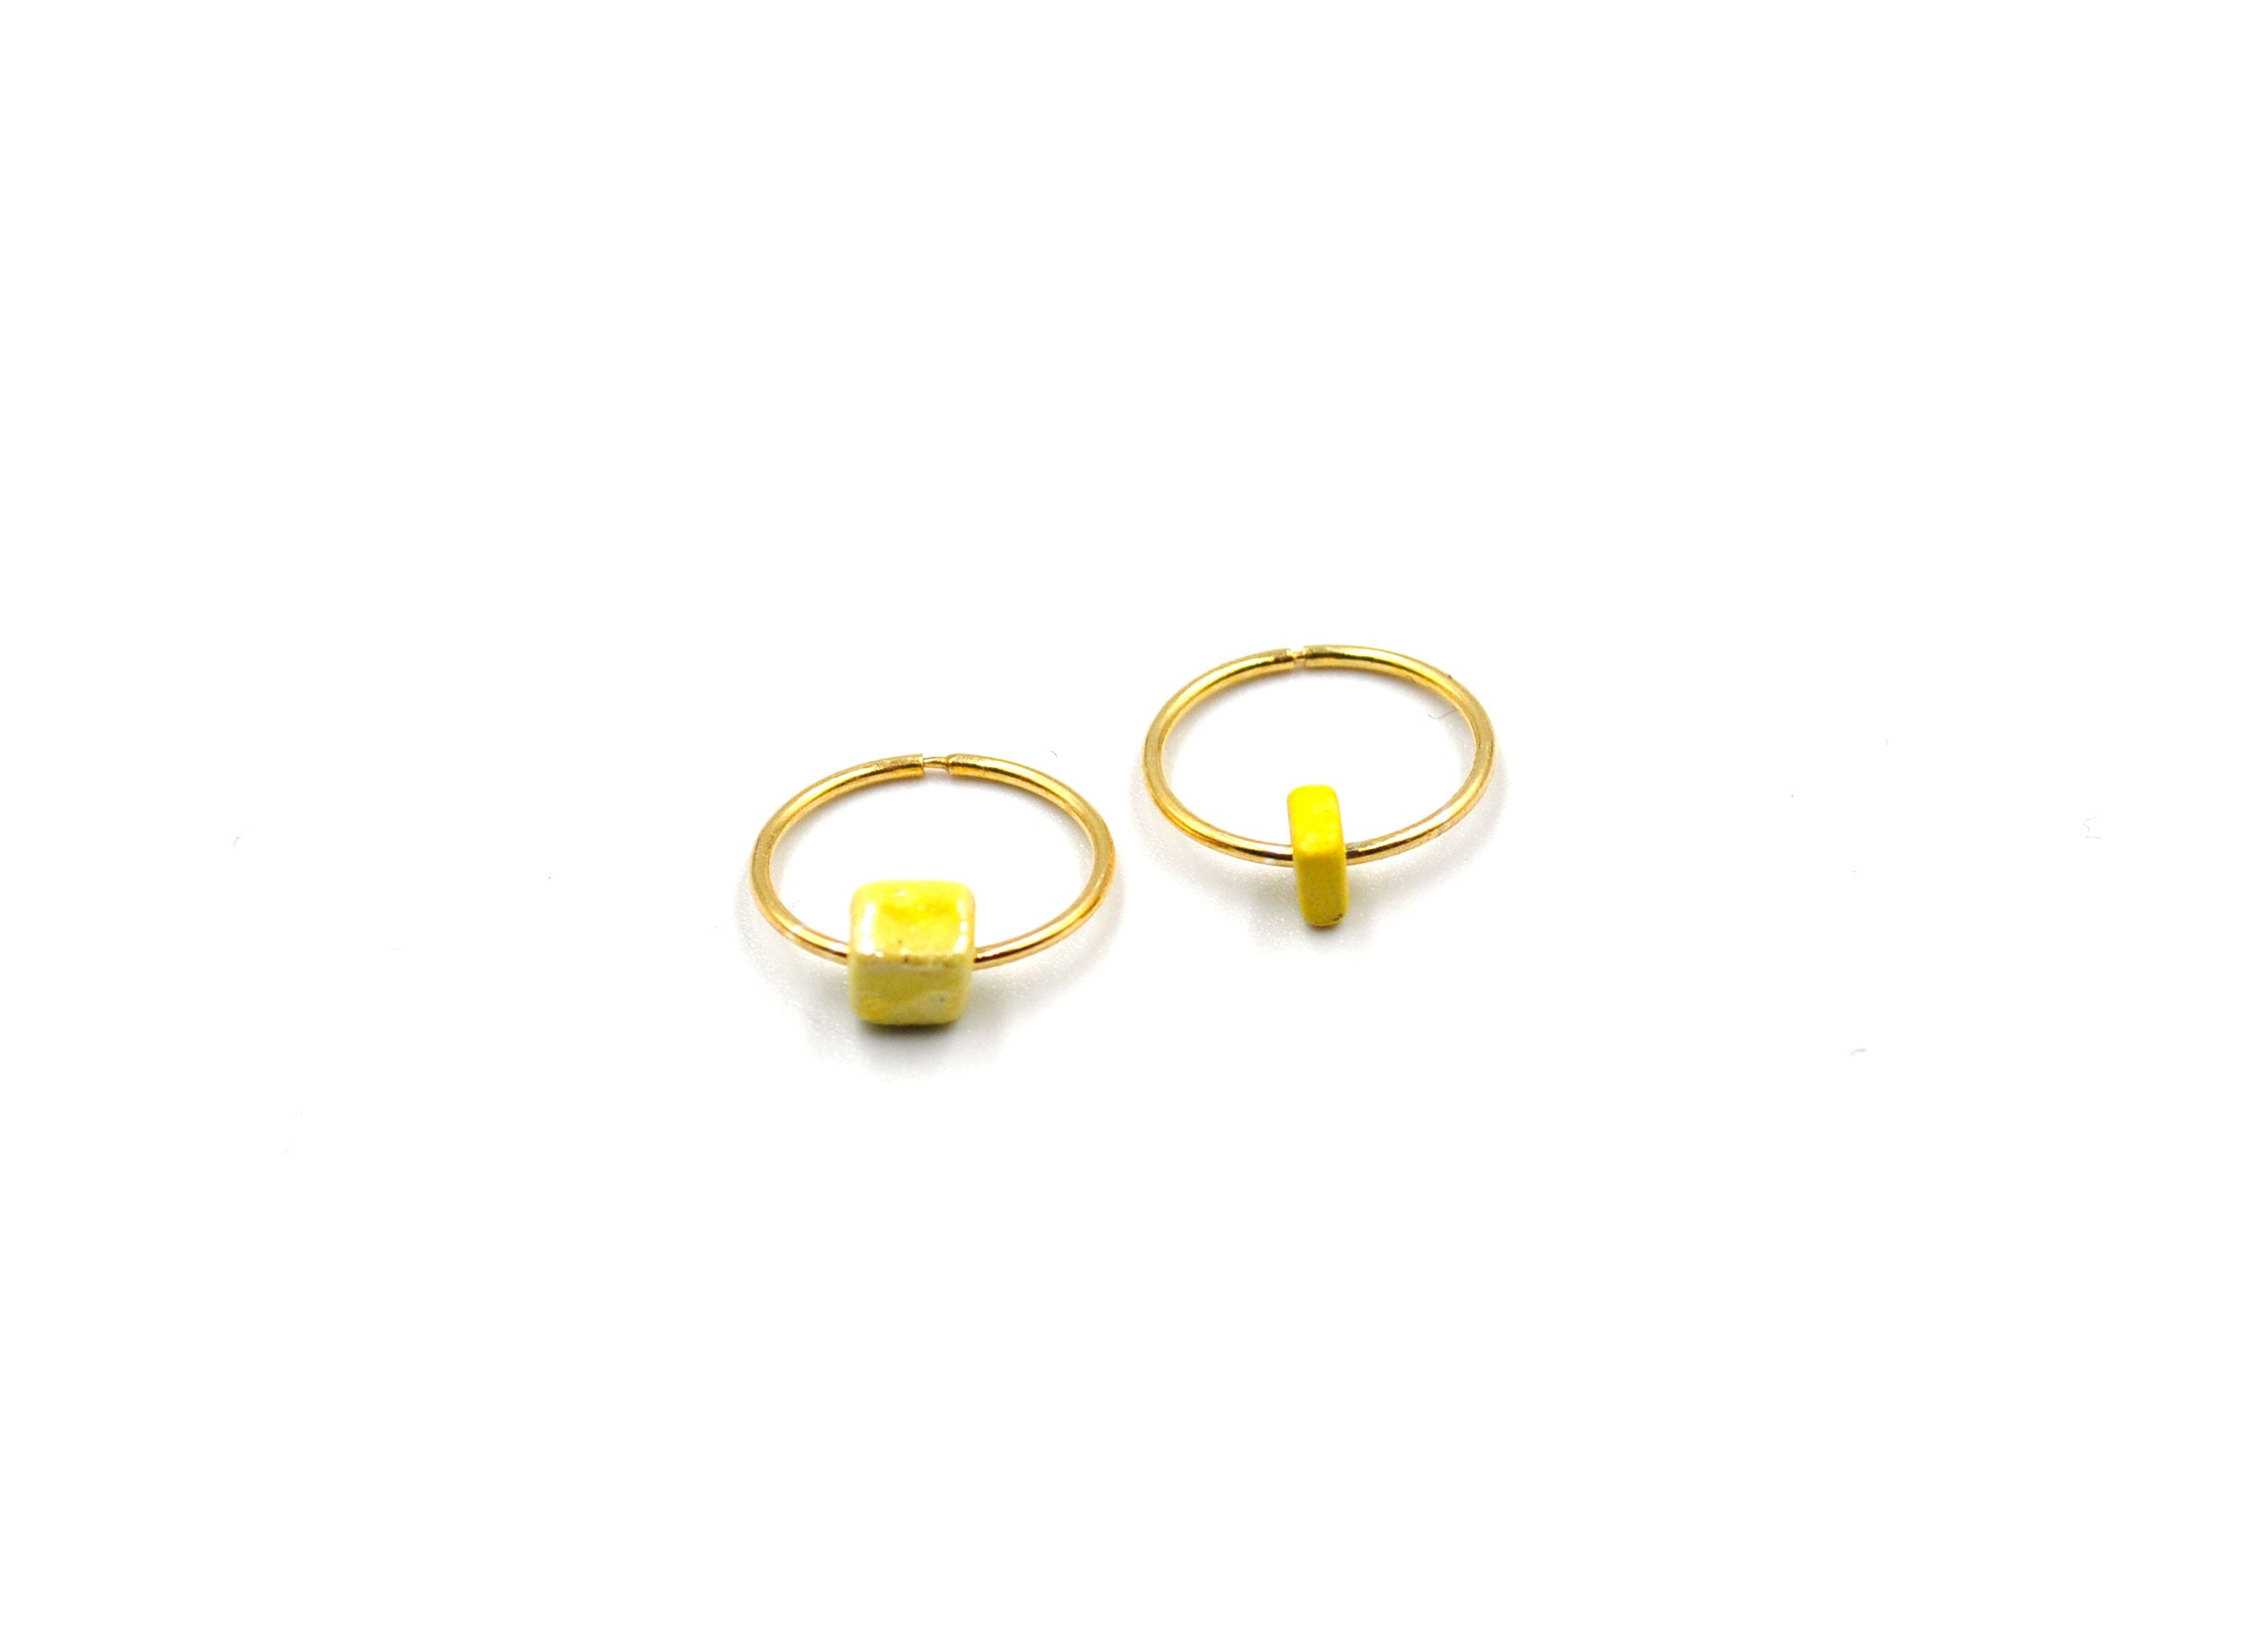 Goldplated silver earrings with yellow ceramics